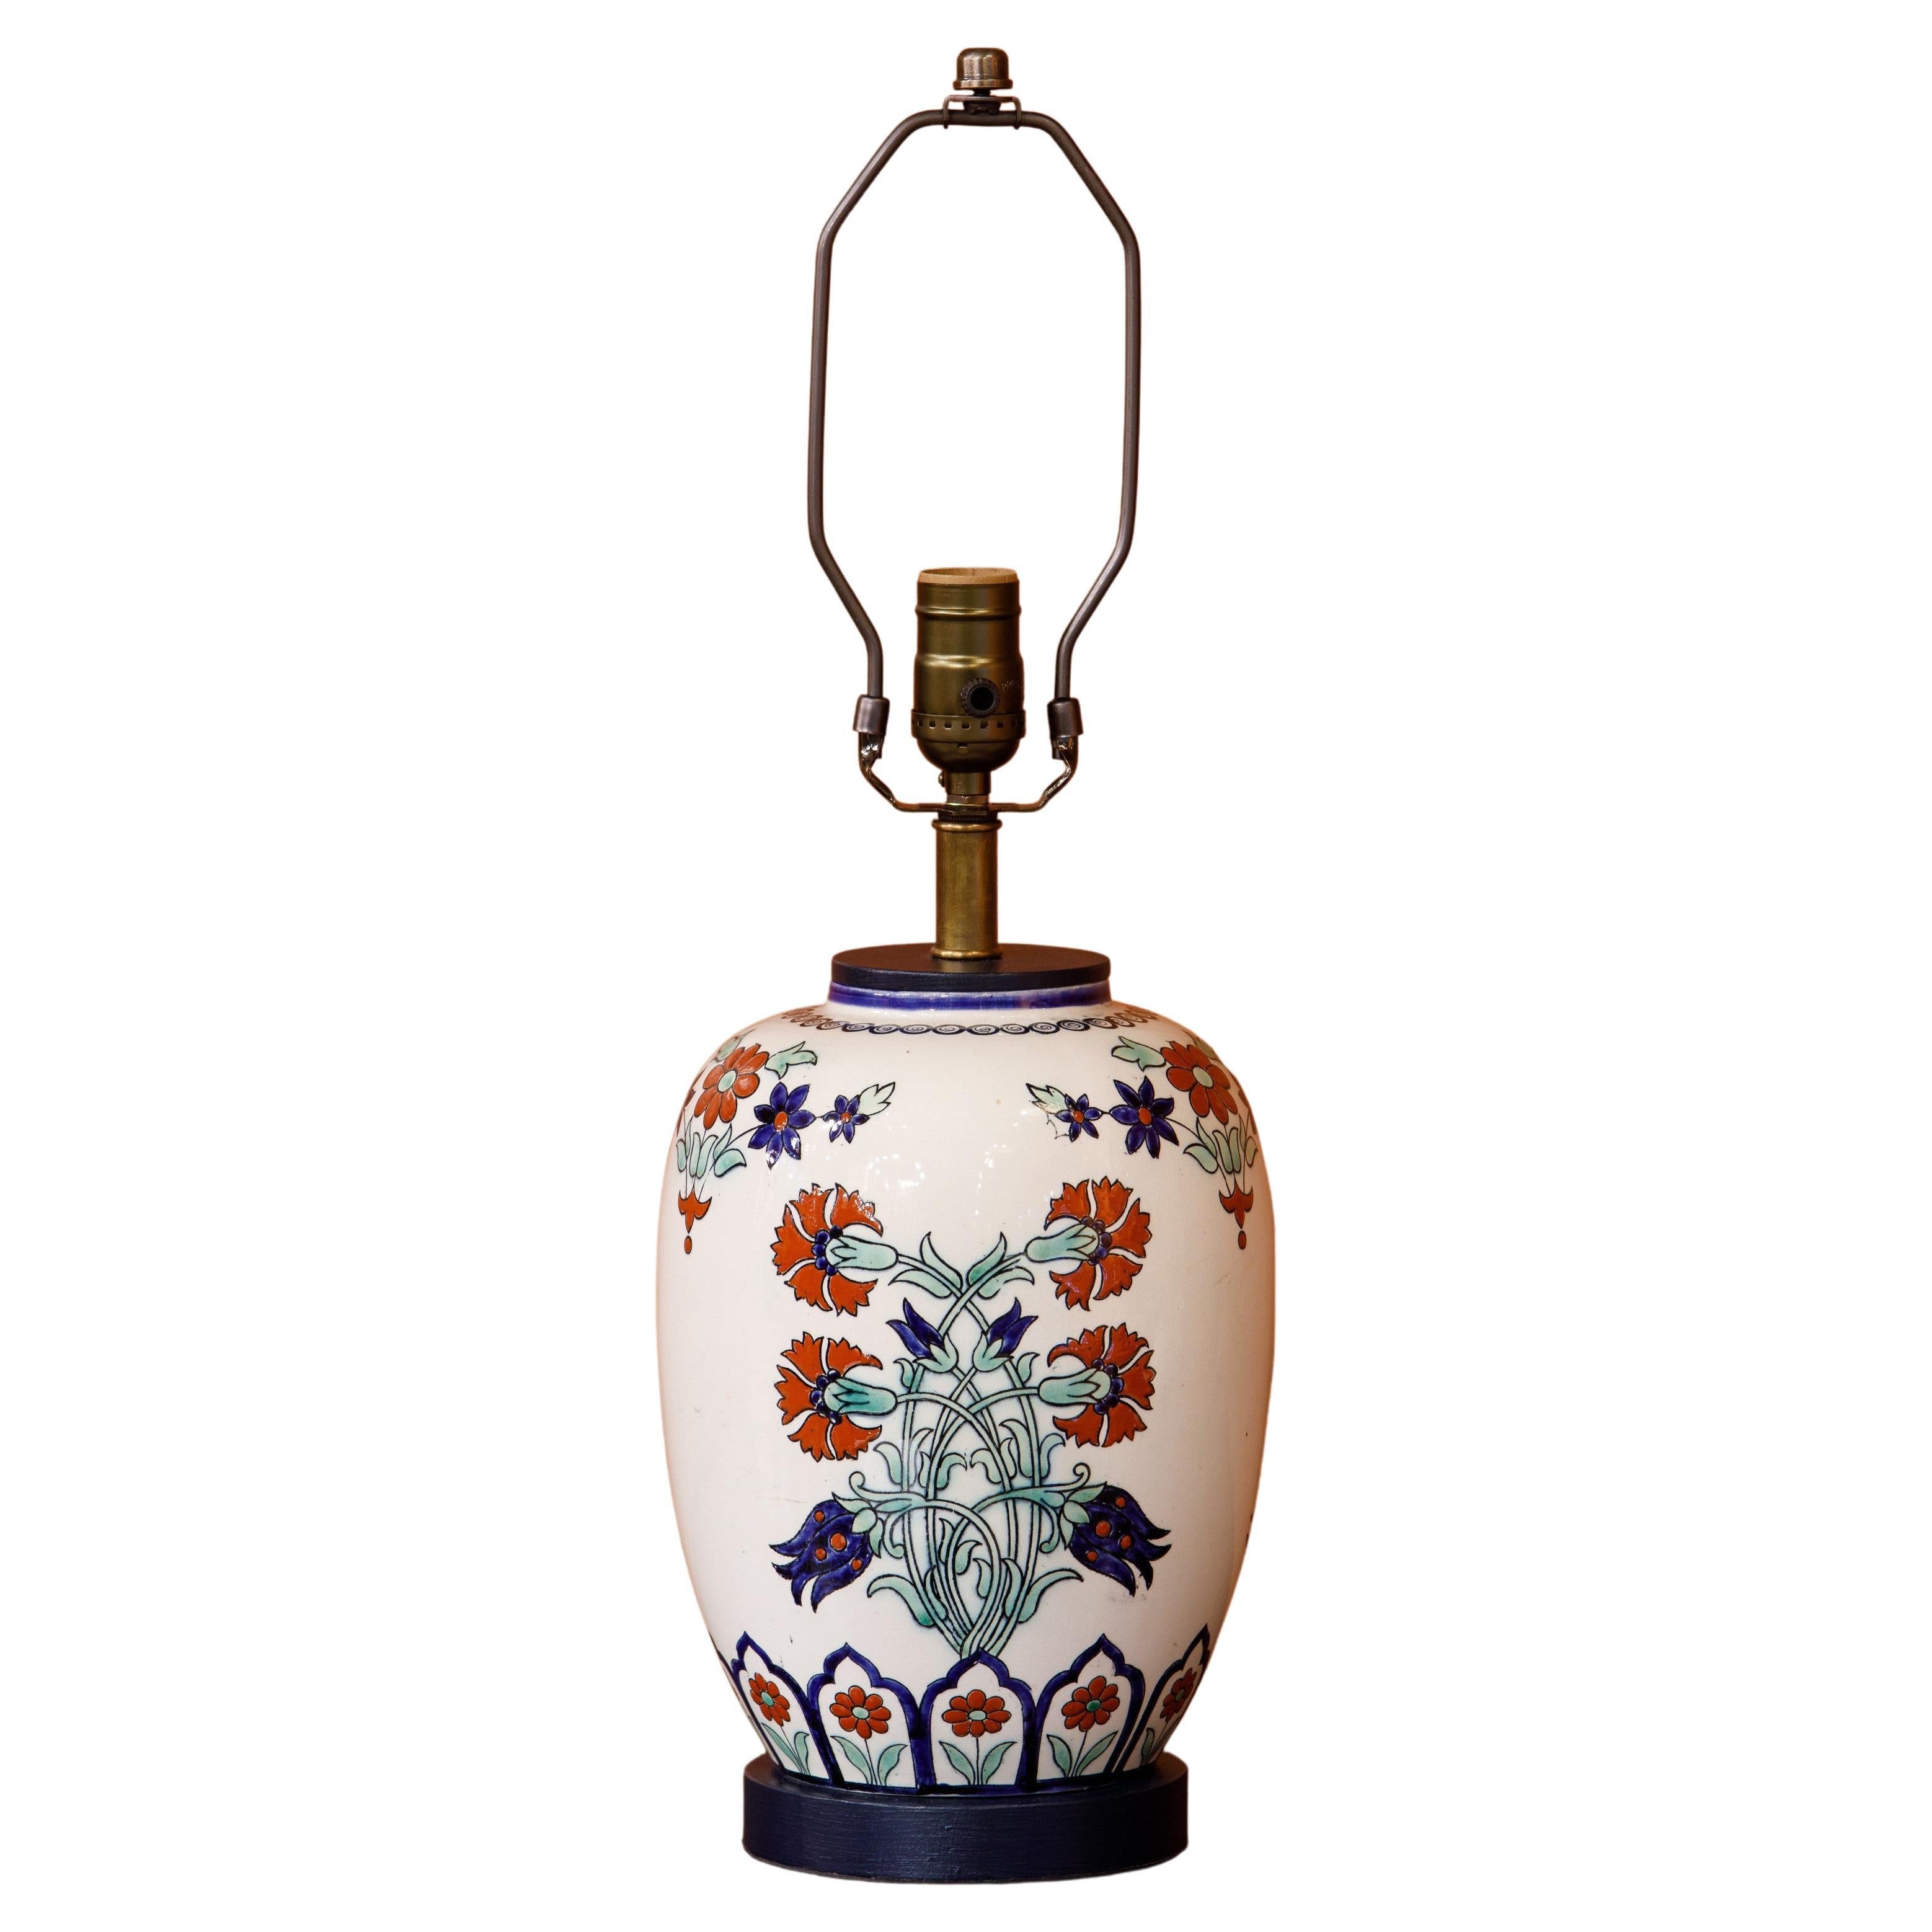 Hand-Painted Table Lamp with Geometric Floral Motif